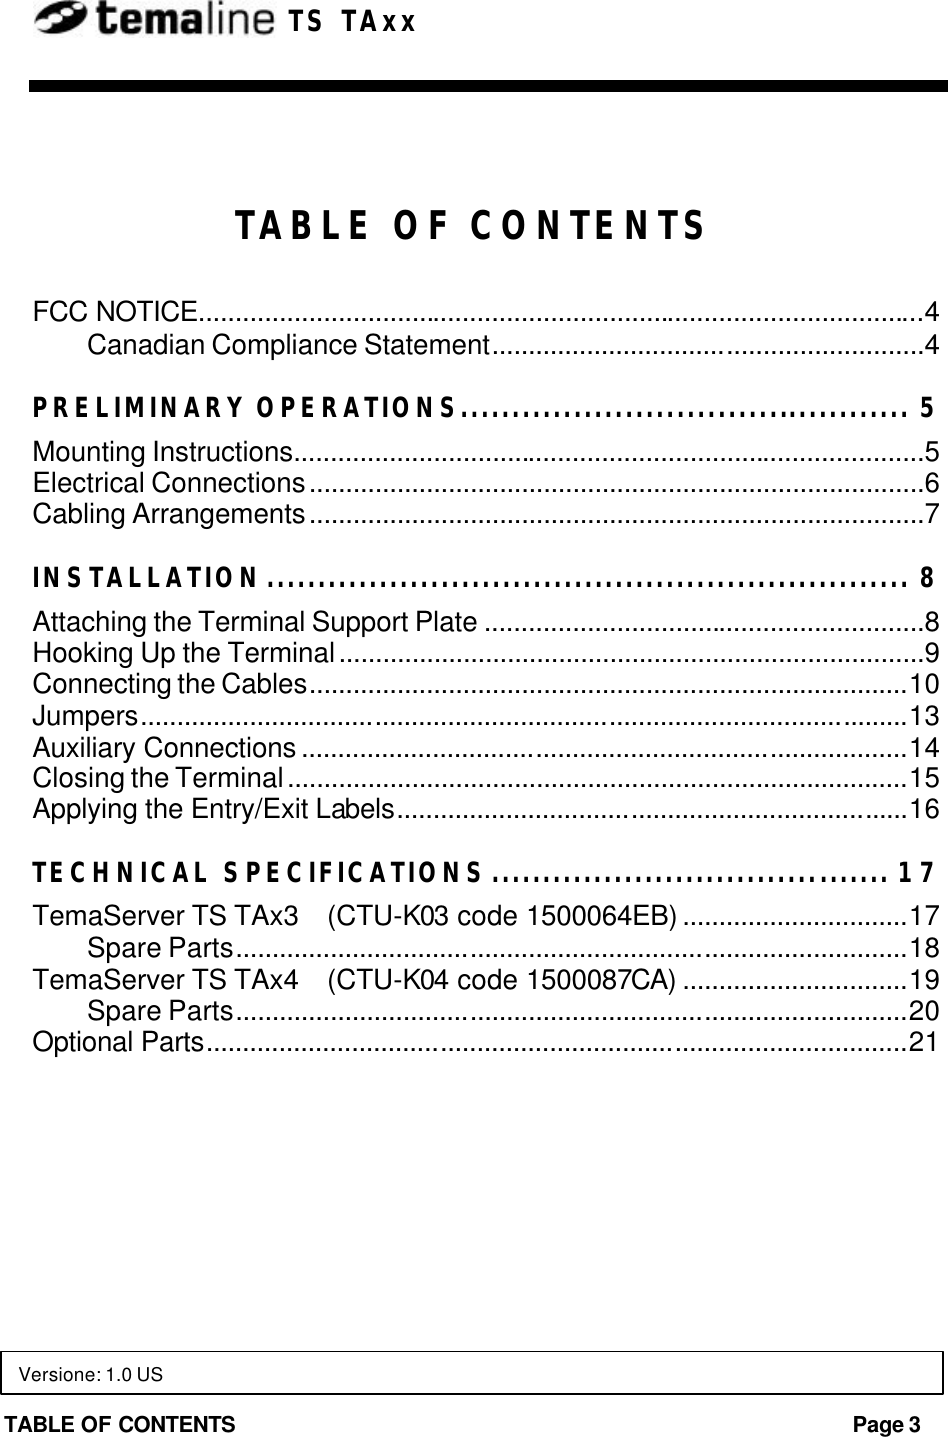 TABLE OF CONTENTS Page 3  TS TAxx  TABLE OF CONTENTS FCC NOTICE...................................................................................................4 Canadian Compliance Statement...........................................................4 PRELIMINARY OPERATIONS............................................ 5 Mounting Instructions......................................................................................5 Electrical Connections....................................................................................6 Cabling Arrangements....................................................................................7 INSTALLATION............................................................... 8 Attaching the Terminal Support Plate ............................................................8 Hooking Up the Terminal................................................................................9 Connecting the Cables..................................................................................10 Jumpers.........................................................................................................13 Auxiliary Connections ...................................................................................14 Closing the Terminal.....................................................................................15 Applying the Entry/Exit Labels......................................................................16 TECHNICAL SPECIFICATIONS....................................... 17 TemaServer TS TAx3    (CTU-K03 code 1500064EB) ...............................17 Spare Parts............................................................................................18 TemaServer TS TAx4    (CTU-K04 code 1500087CA) ...............................19 Spare Parts............................................................................................20 Optional Parts................................................................................................21  Versione: 1.0 US 